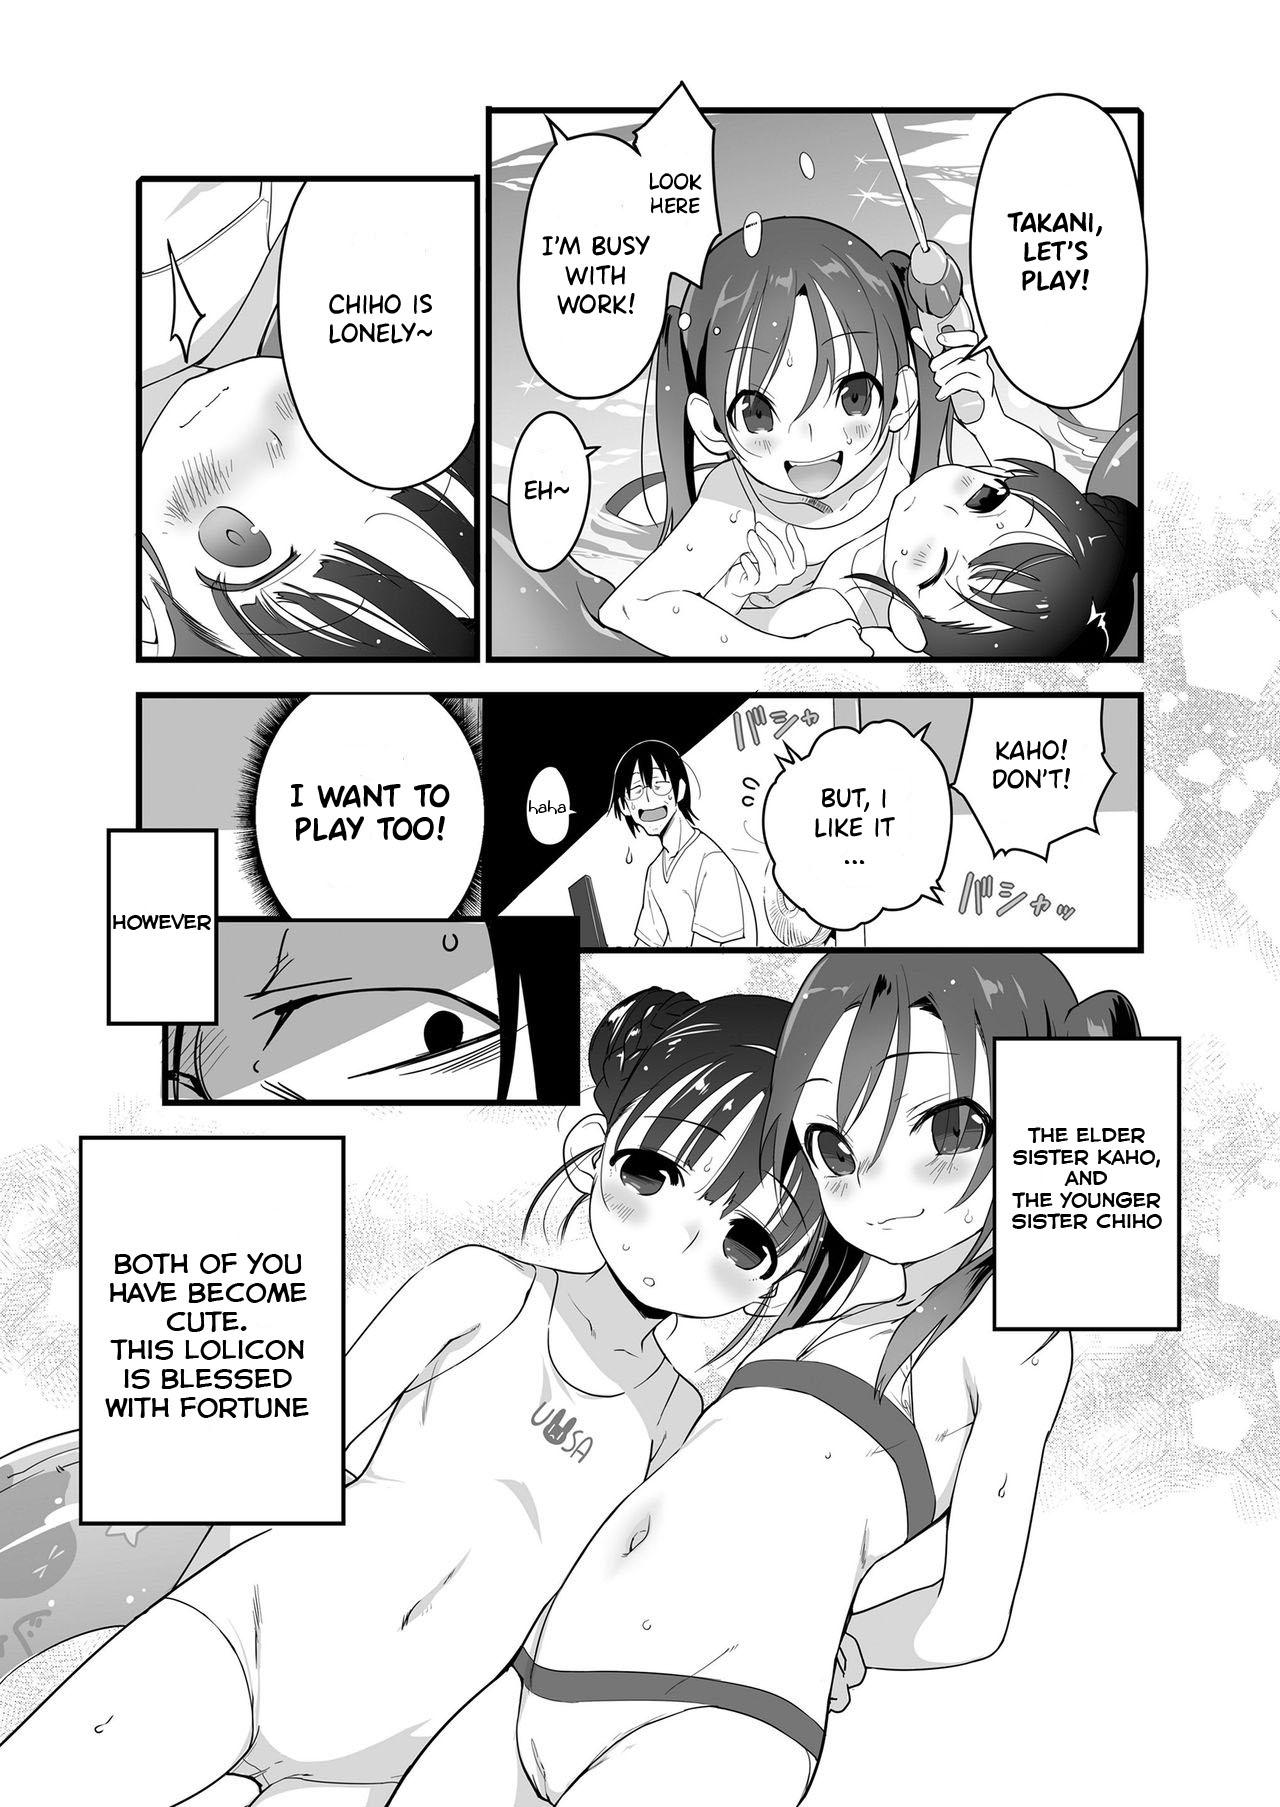 Free Uchiage Hanabi, Ane to Miruka? Imouto to Miruka? | Fireworks, Should we see it with the elder sister or the younger sister? Unshaved - Page 3